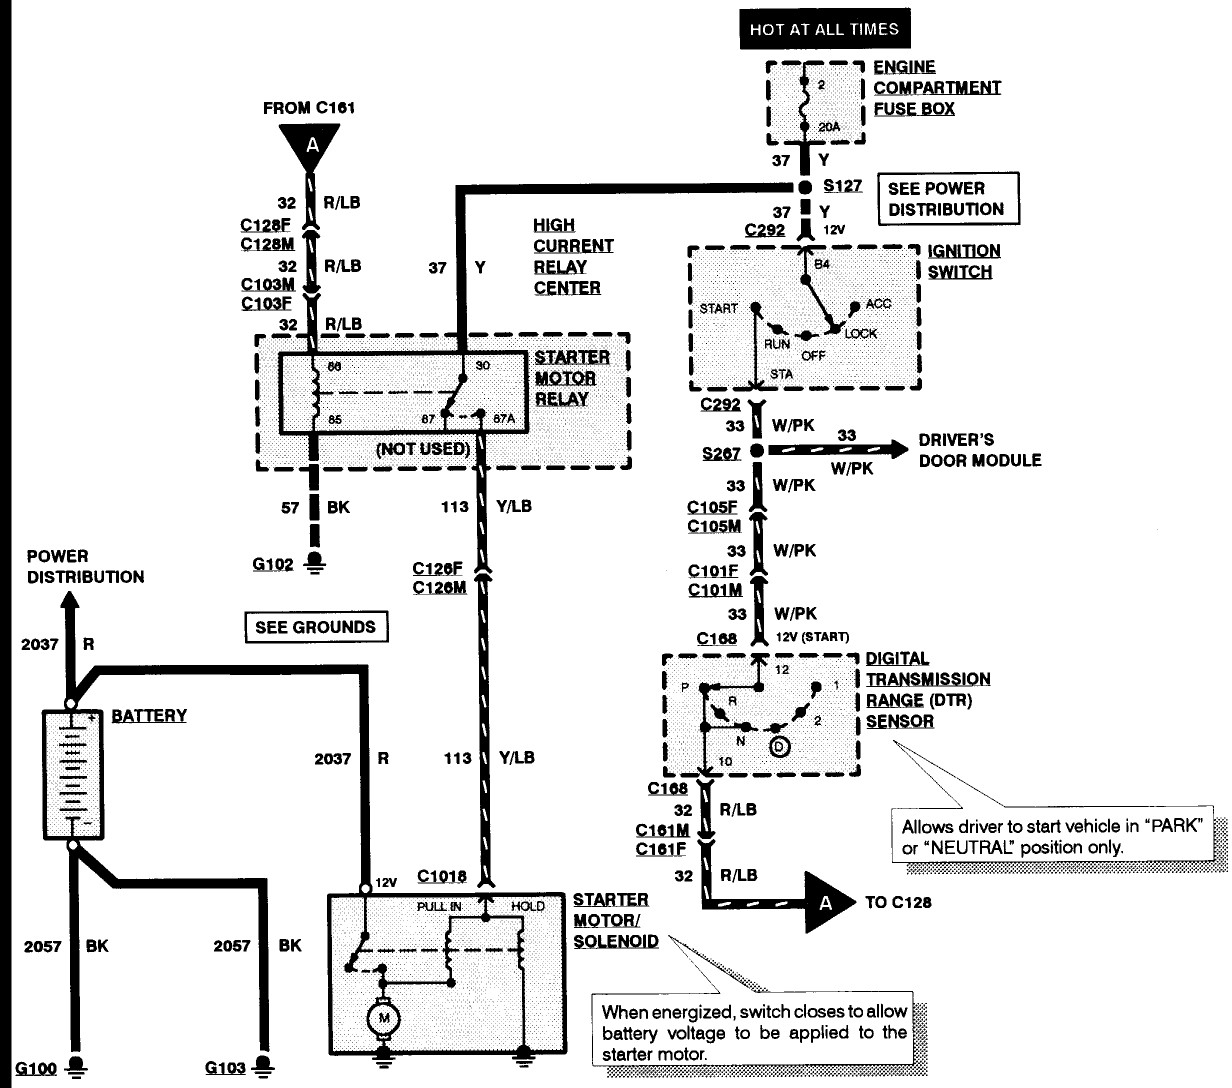 wiring diagram for a 1991 ford starter solenoid on a 302 v8 rh justanswer F150 Starter Wiring Diagram F150 Starter Wiring Diagram